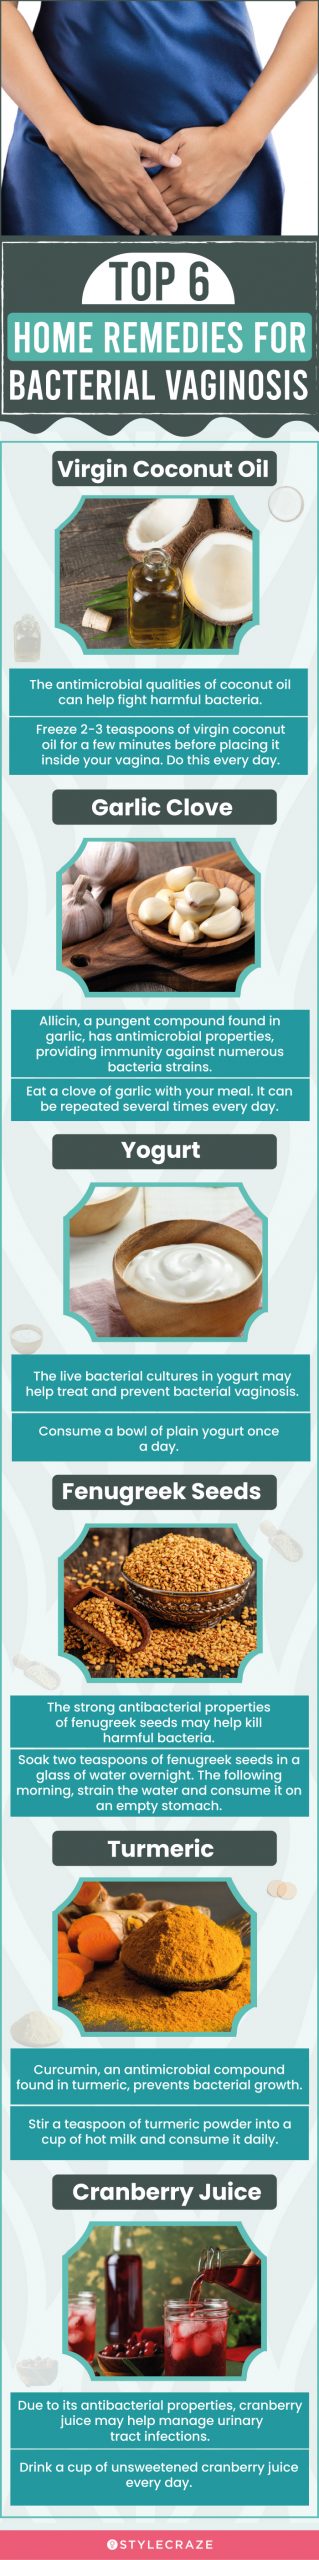 top 6 home remedies for bacterial vaginosis (infographic)